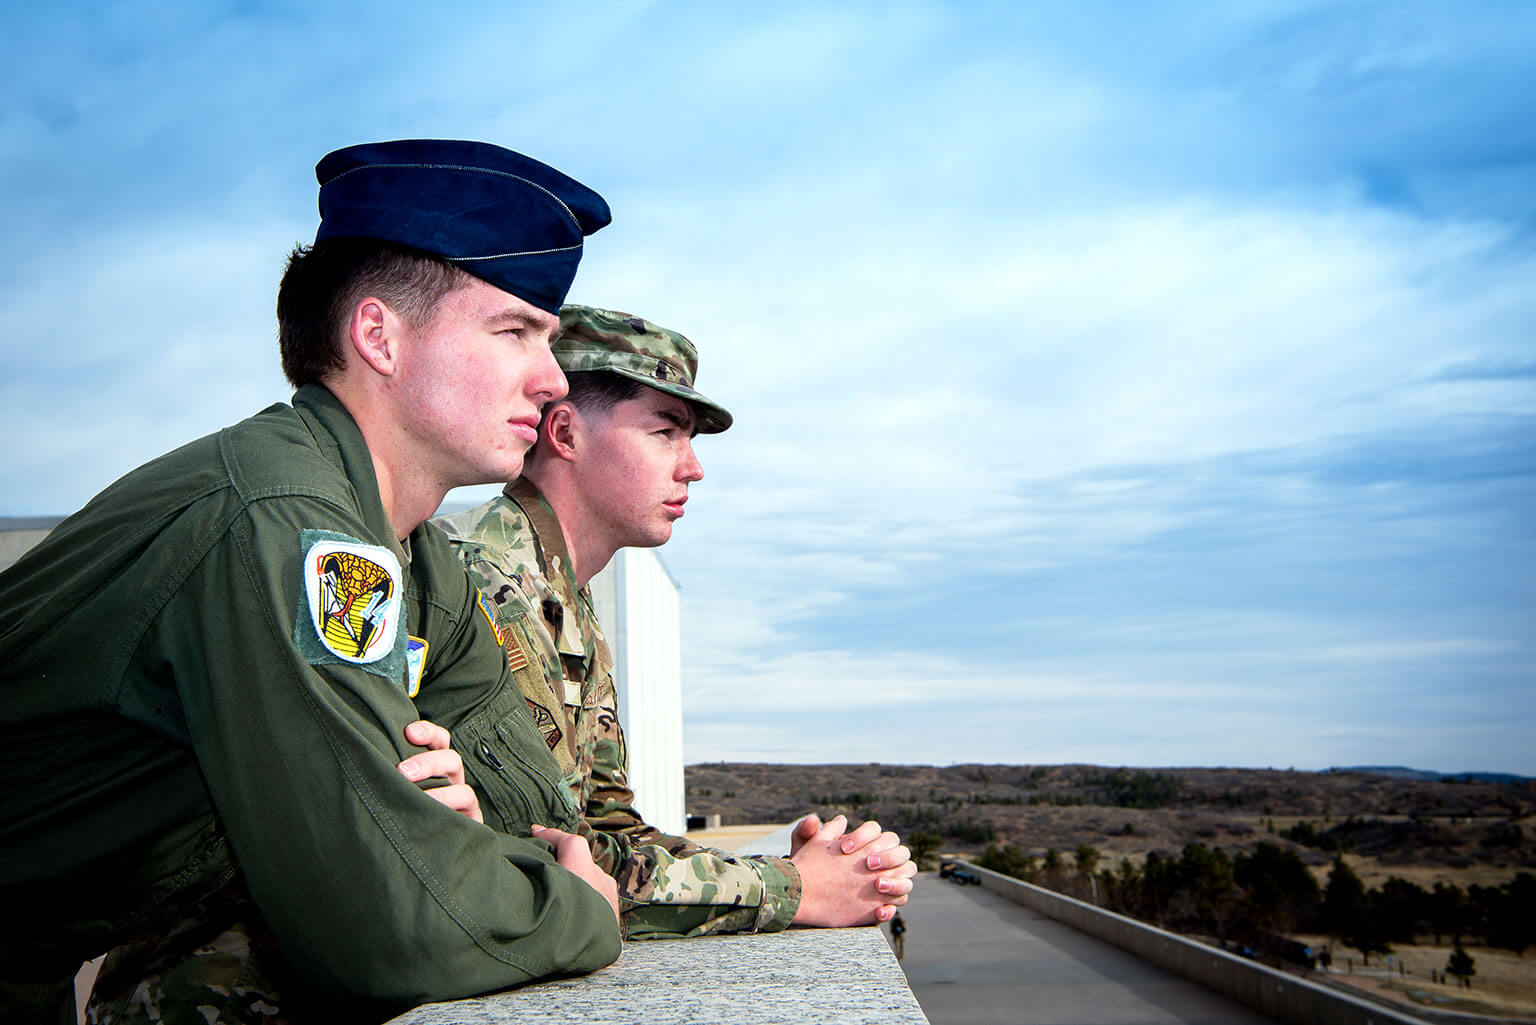 Cadet 2nd Class Chad Schuch Jr. and Cadet 4th Class Dylan Schuch look over the Terrazzo.